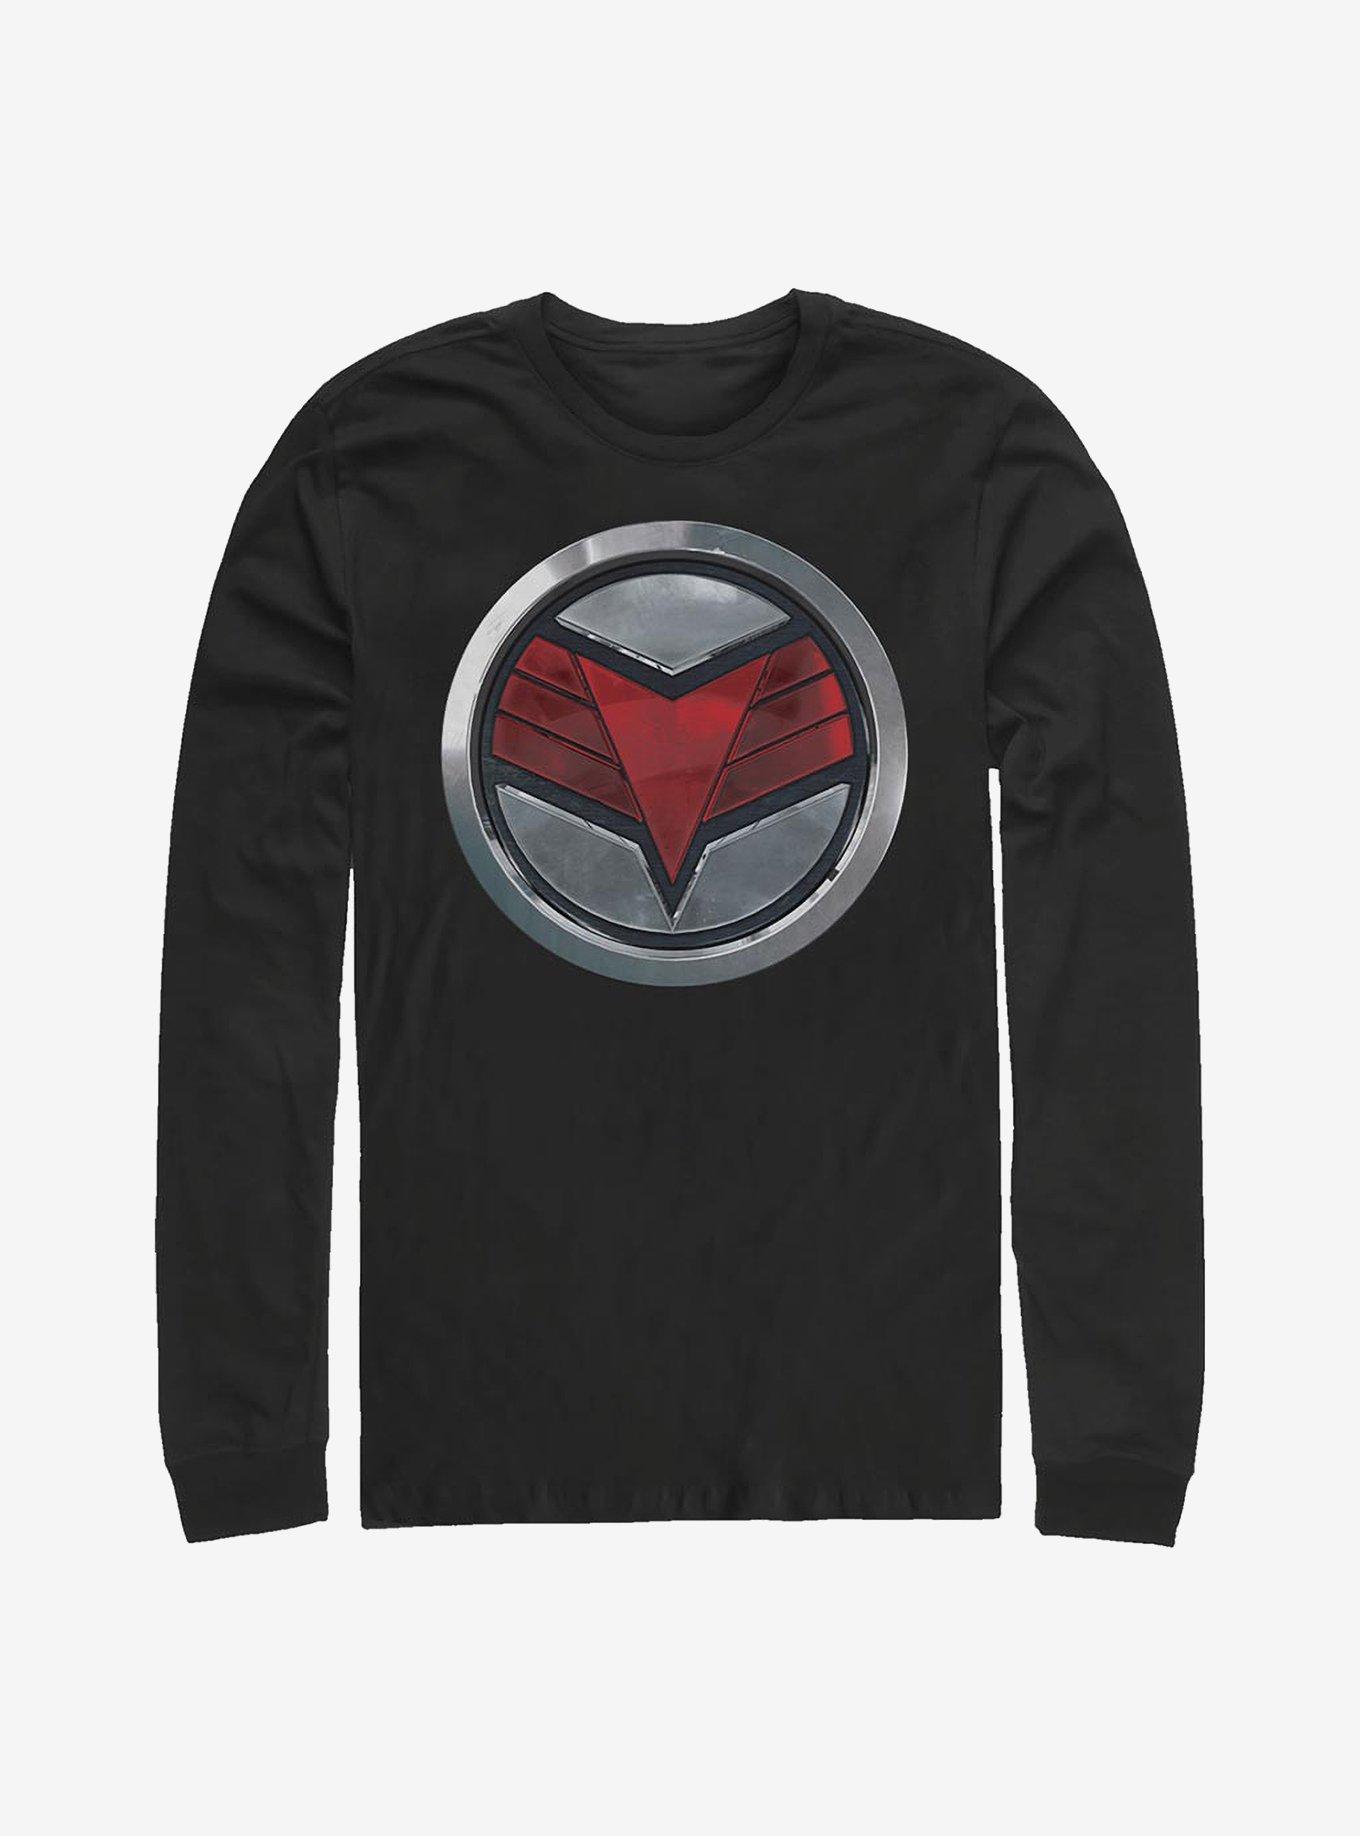 Marvel The Falcon And The Winter Soldier Falcon Logo Long-Sleeve T-Shirt, BLACK, hi-res